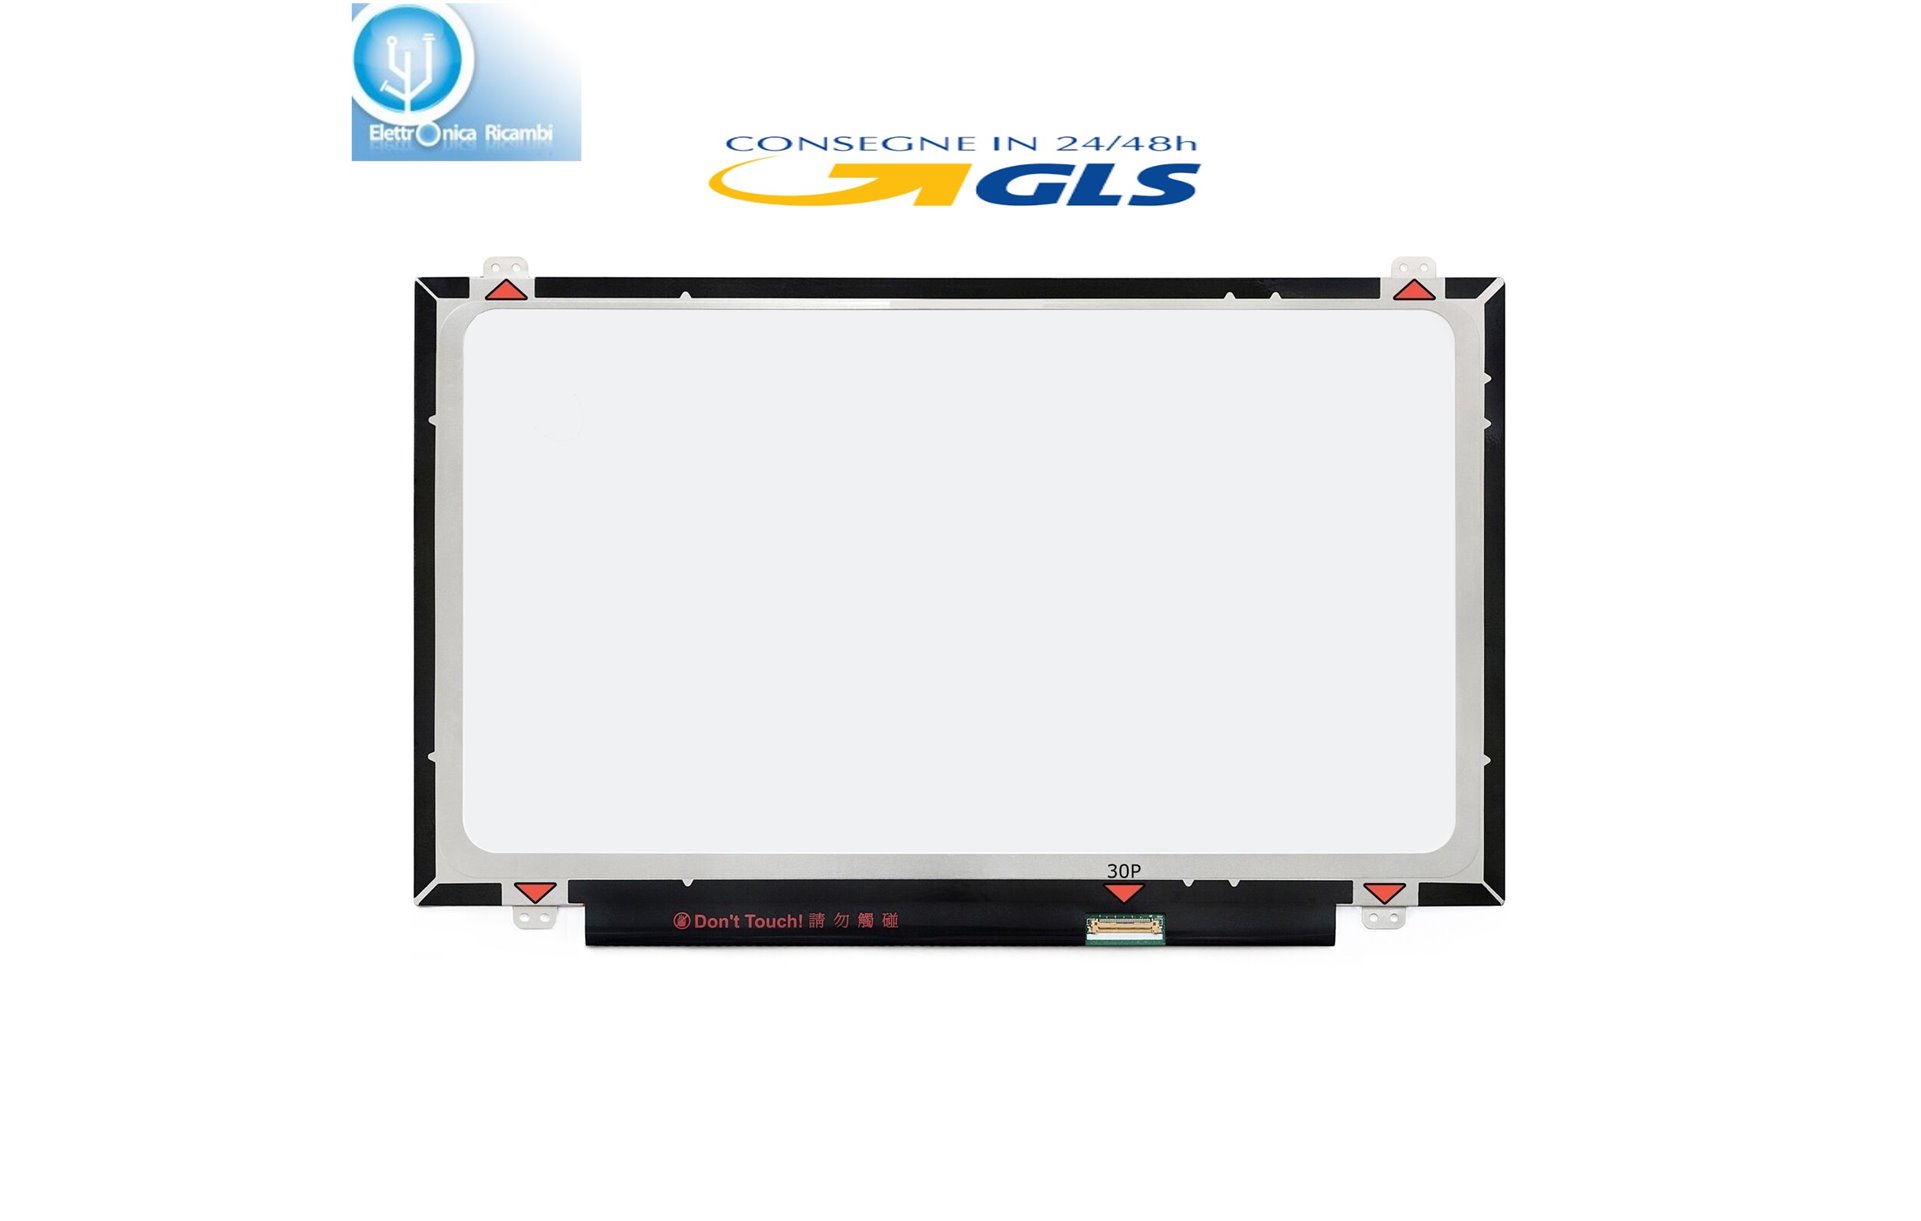 Display LCD Schermo  acer aspire 1 a114-31-p15b 14.0 LED 30 pin 1366x768